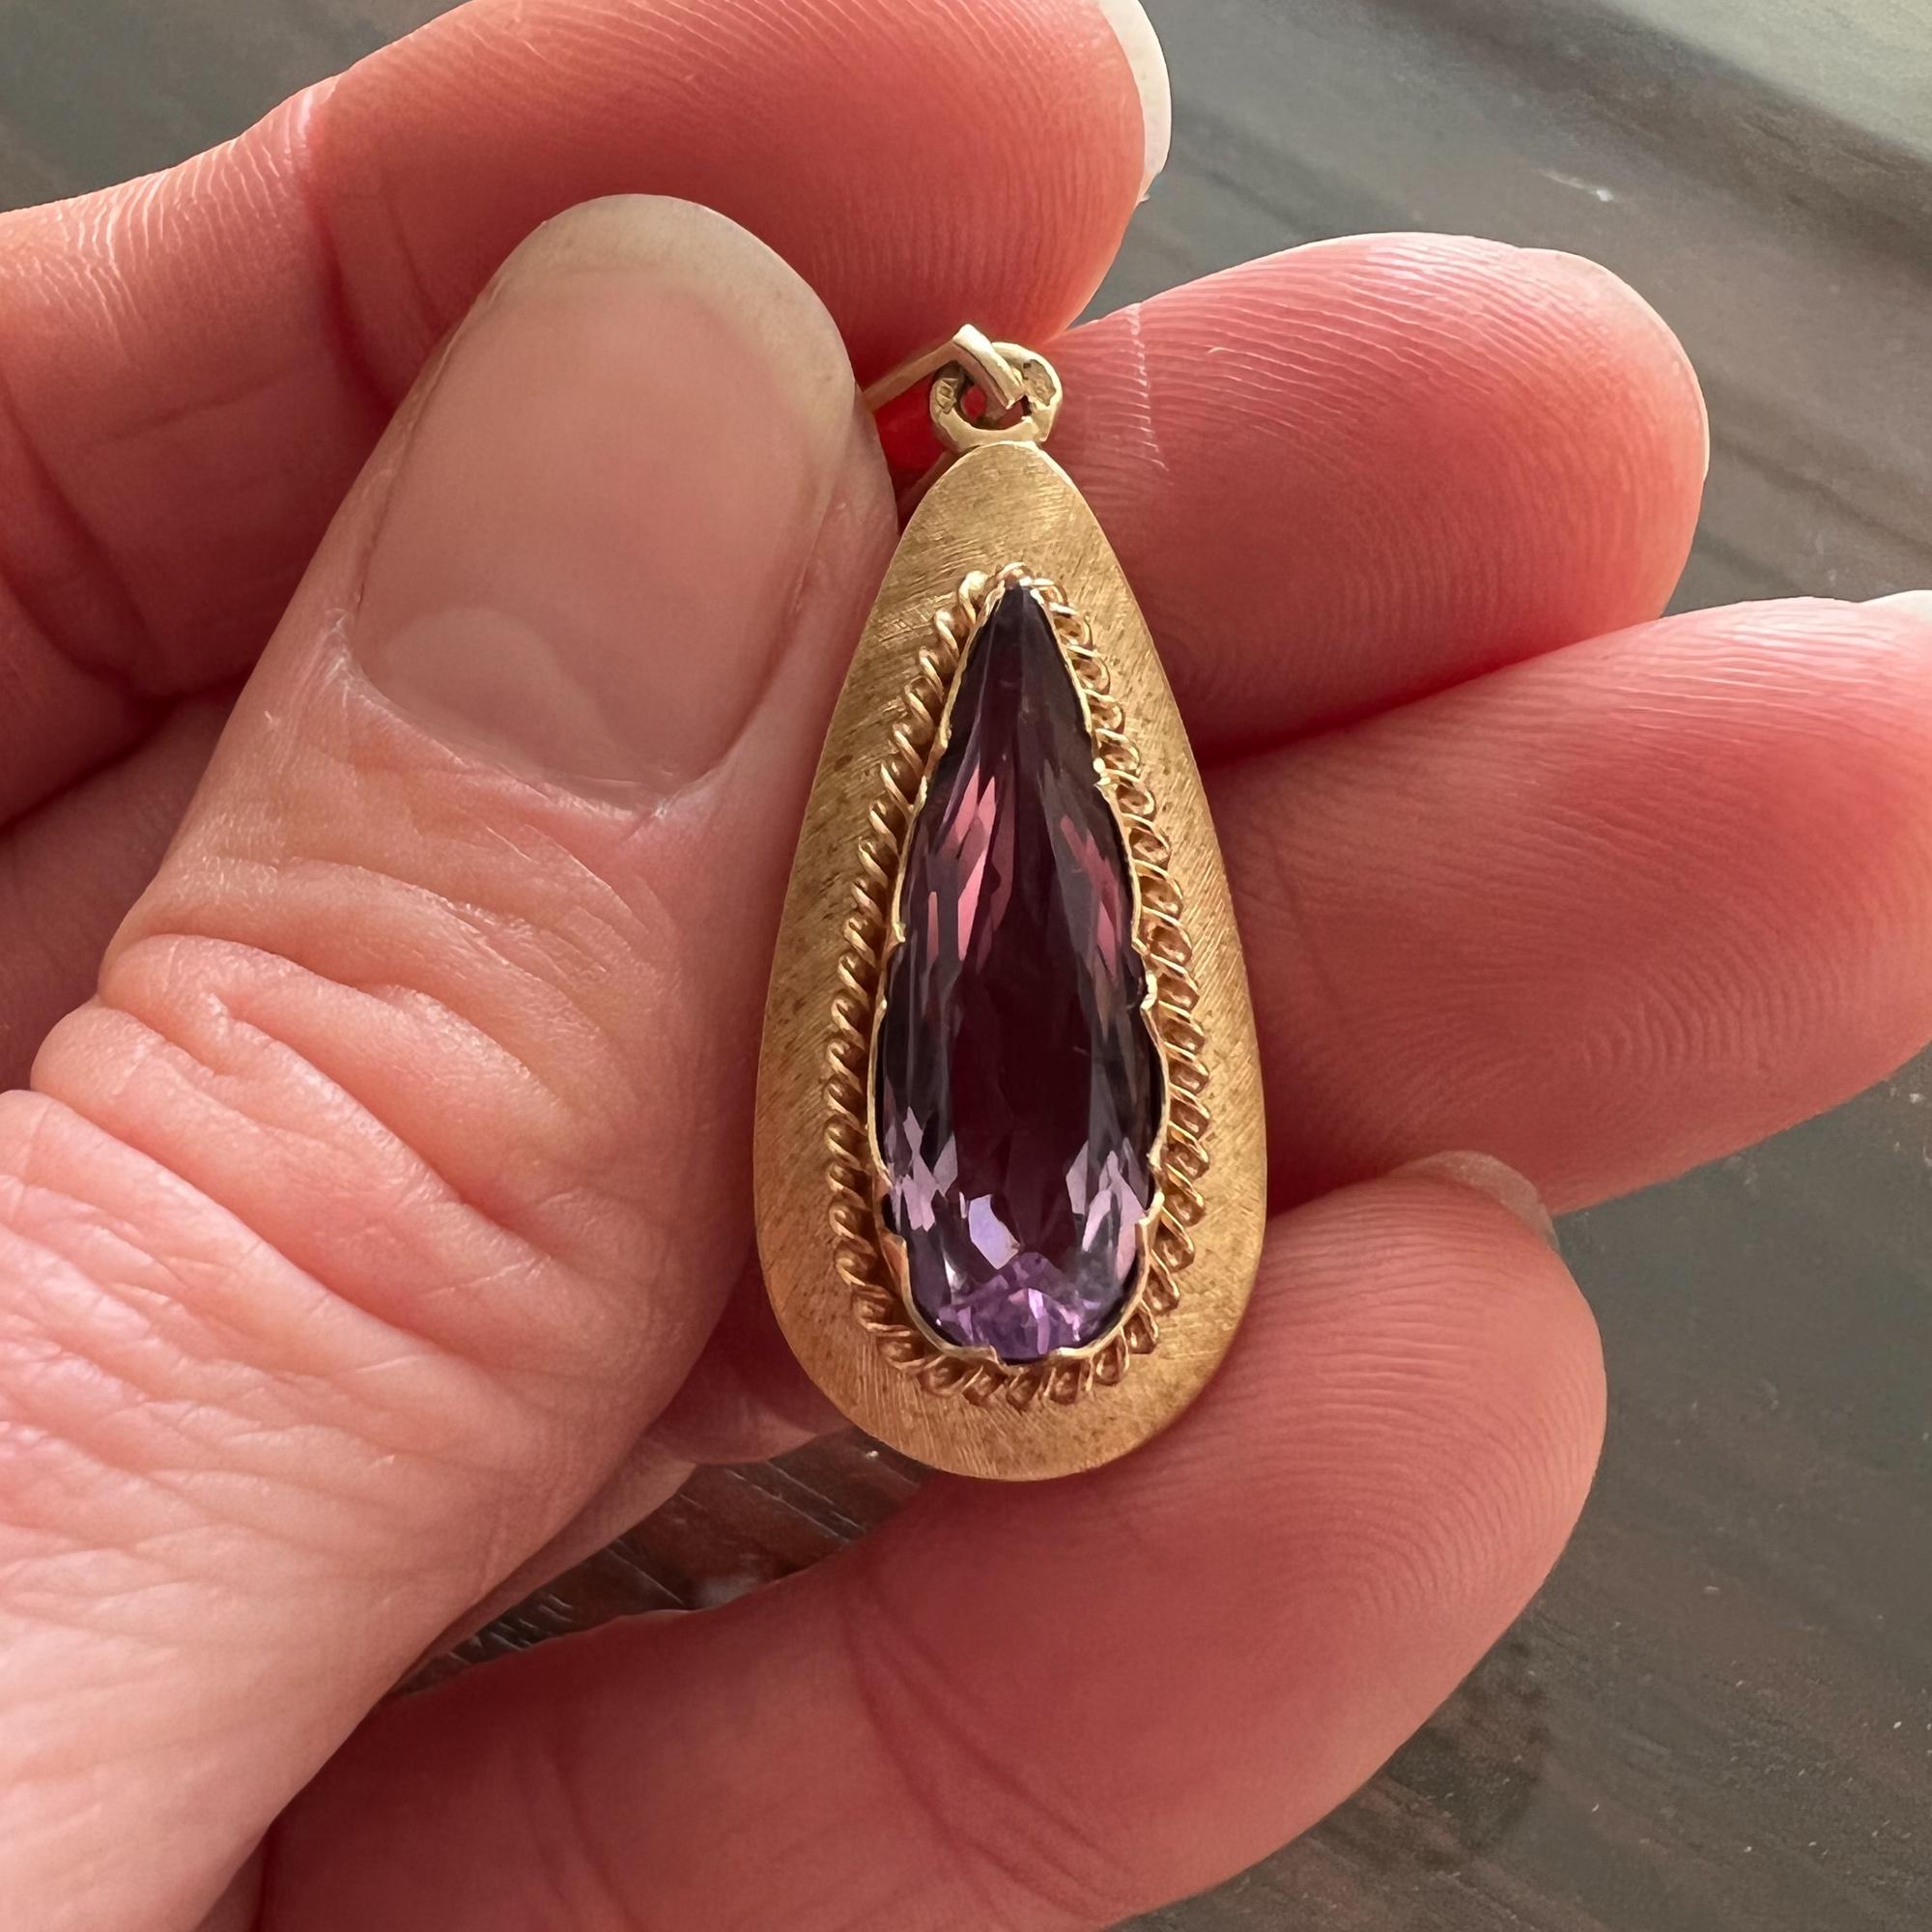 An amethyst drop-shaped vintage pendant crafted in 14 karat gold. The pendant is set with a translucent faceted amethyst stone. The amethyst is light purple in color, the stone is faceted and bezel set in a gold worked matted frame which has a